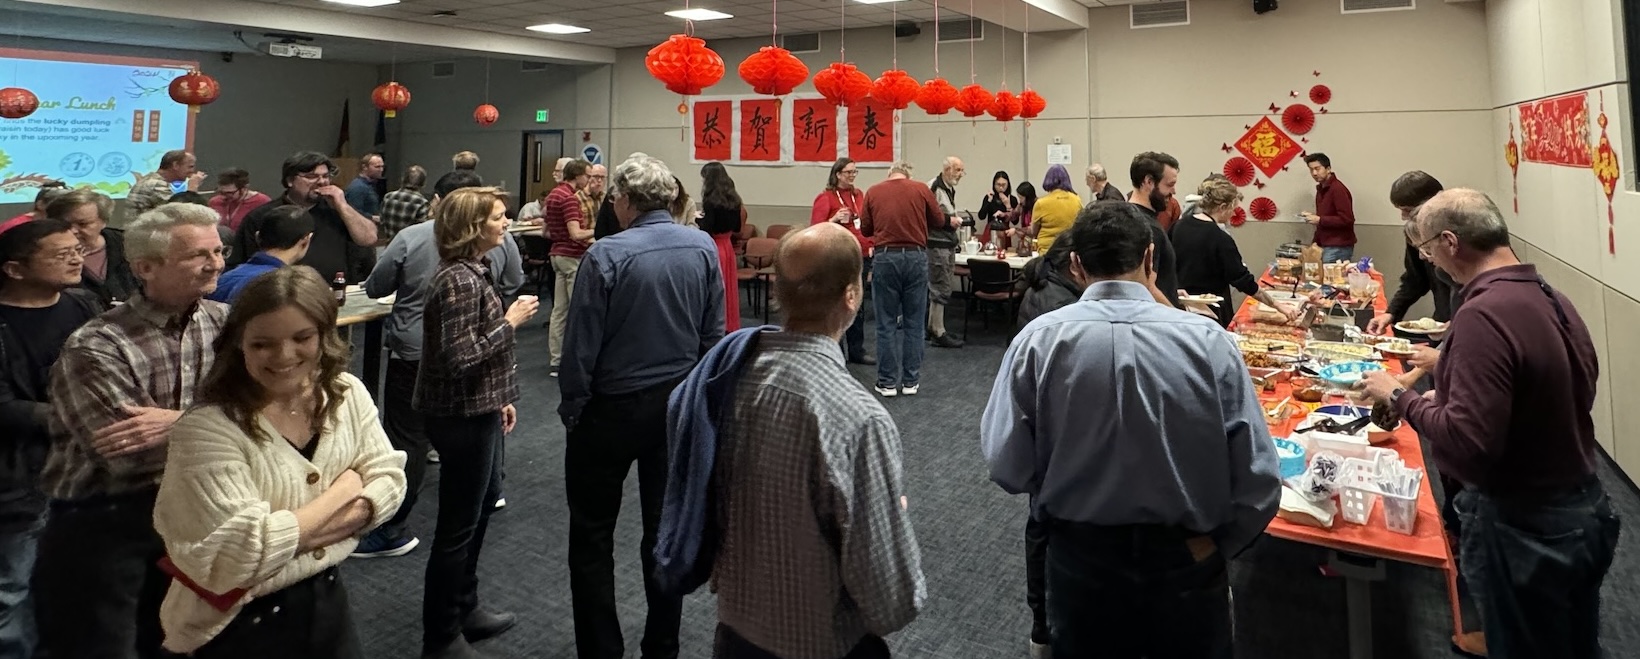 Chinese New Year's Eve celebration with GSL staff, a potluck, and red and gold decorations in the conference room.